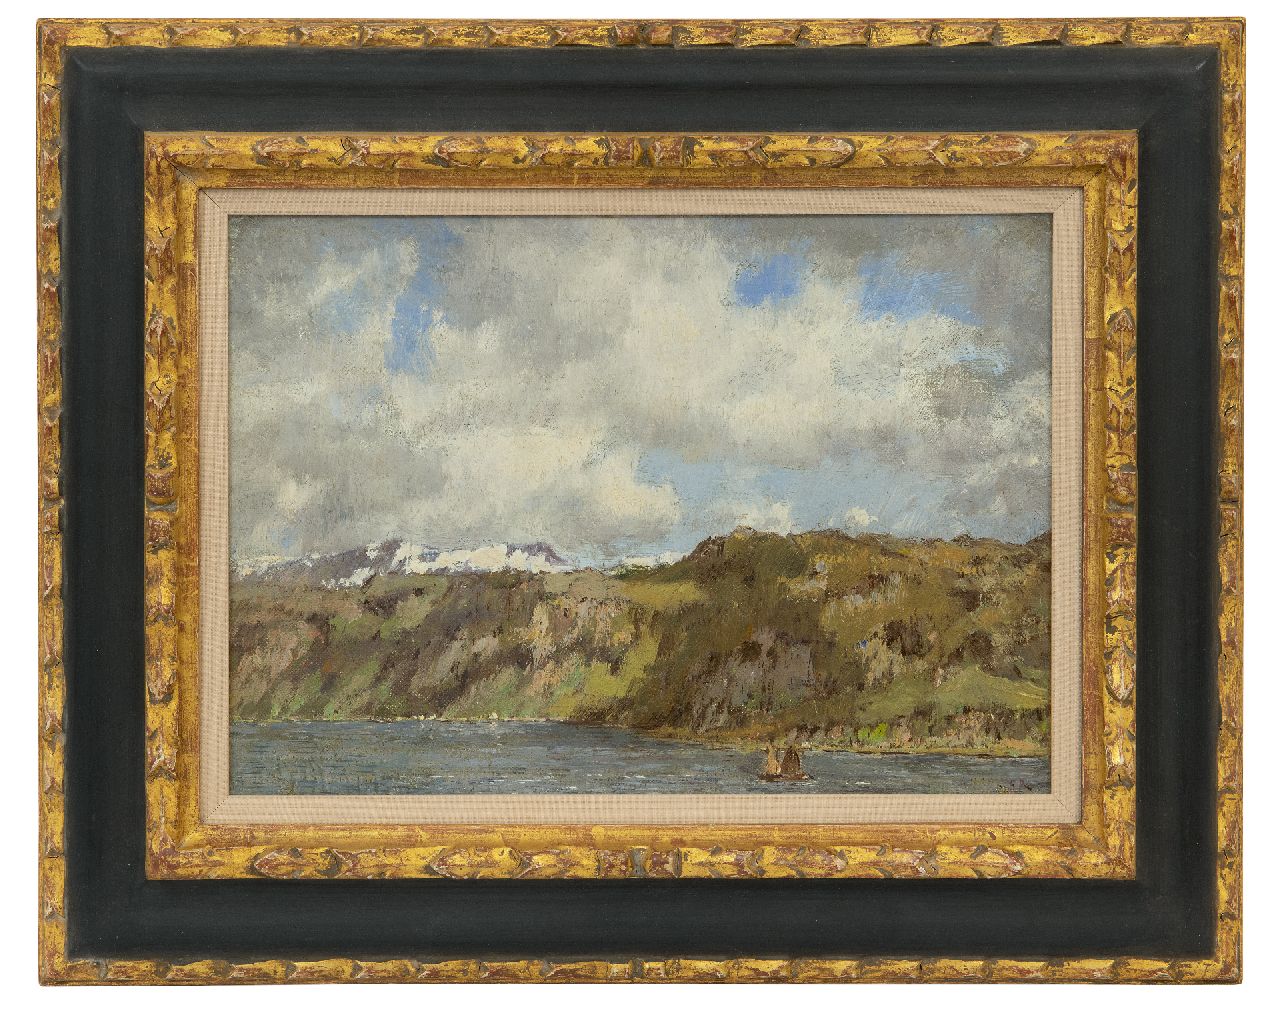 Gorter A.M.  | 'Arnold' Marc Gorter, Sailing boats in a fjord, Norway, oil on canvas 25.0 x 35.0 cm, signed l.r. and painted circa 1922